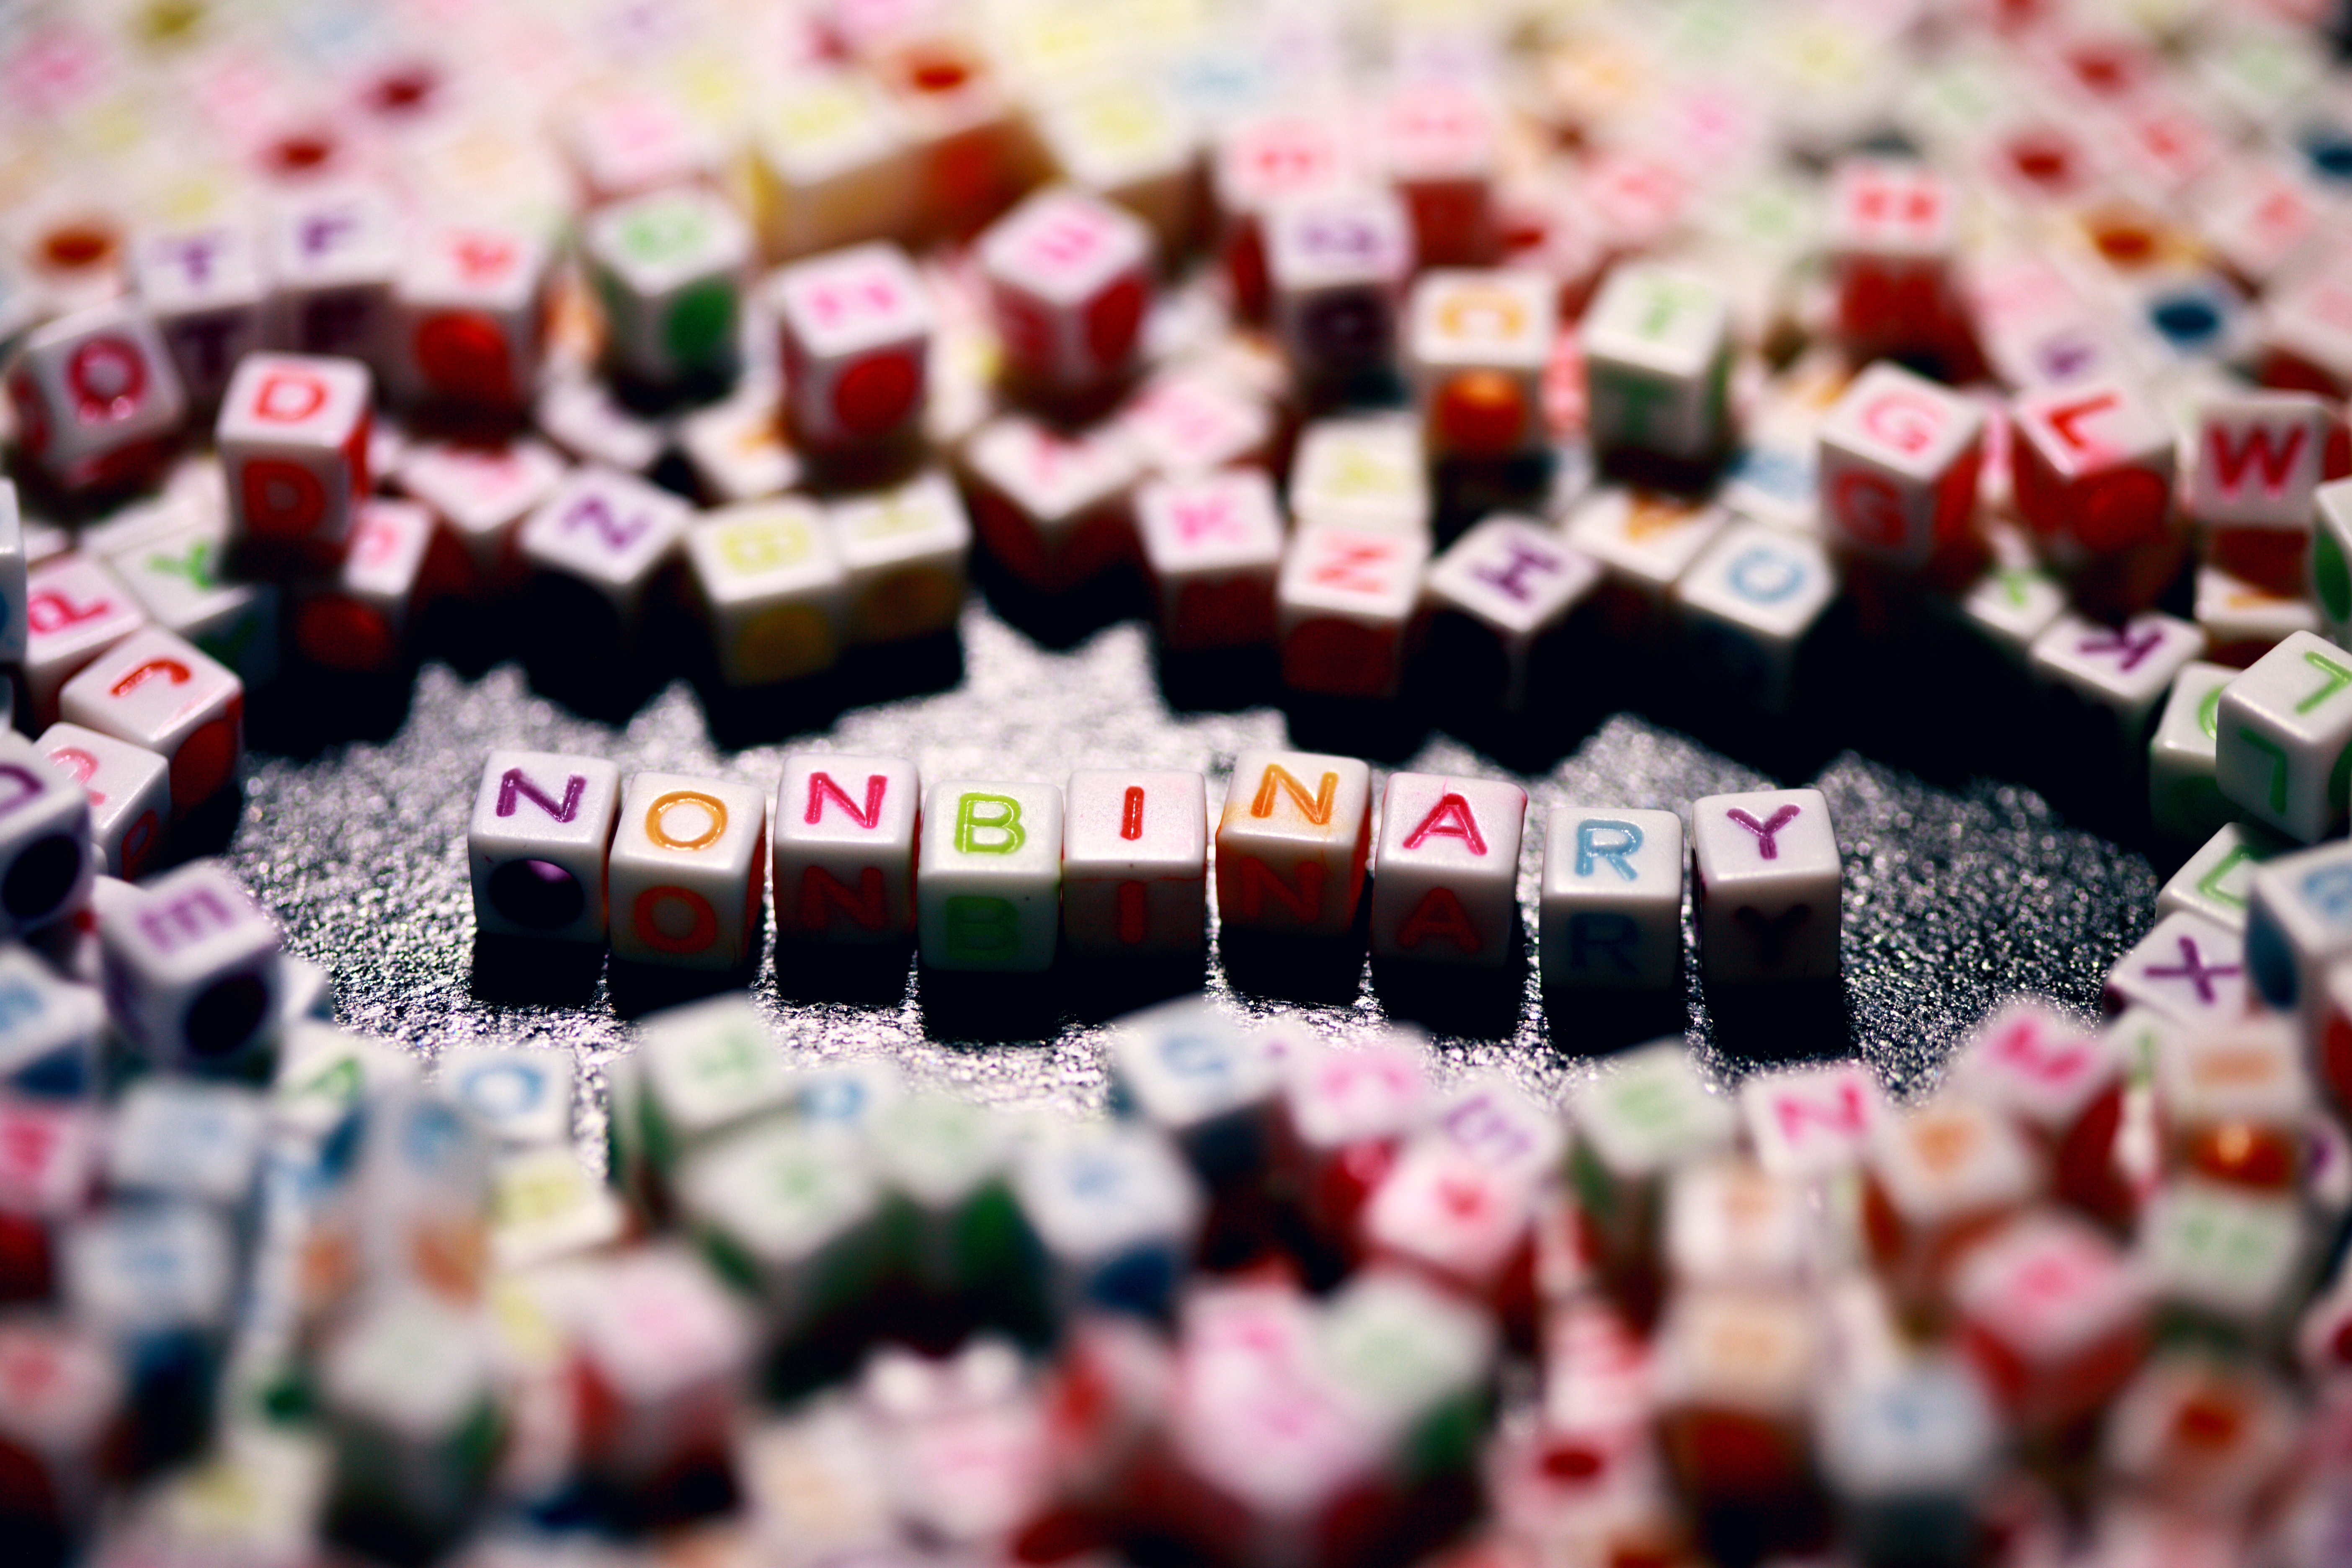 multicolored beaded letters on a surface, the center of the photo has the word nonbinary spelled with different colors.